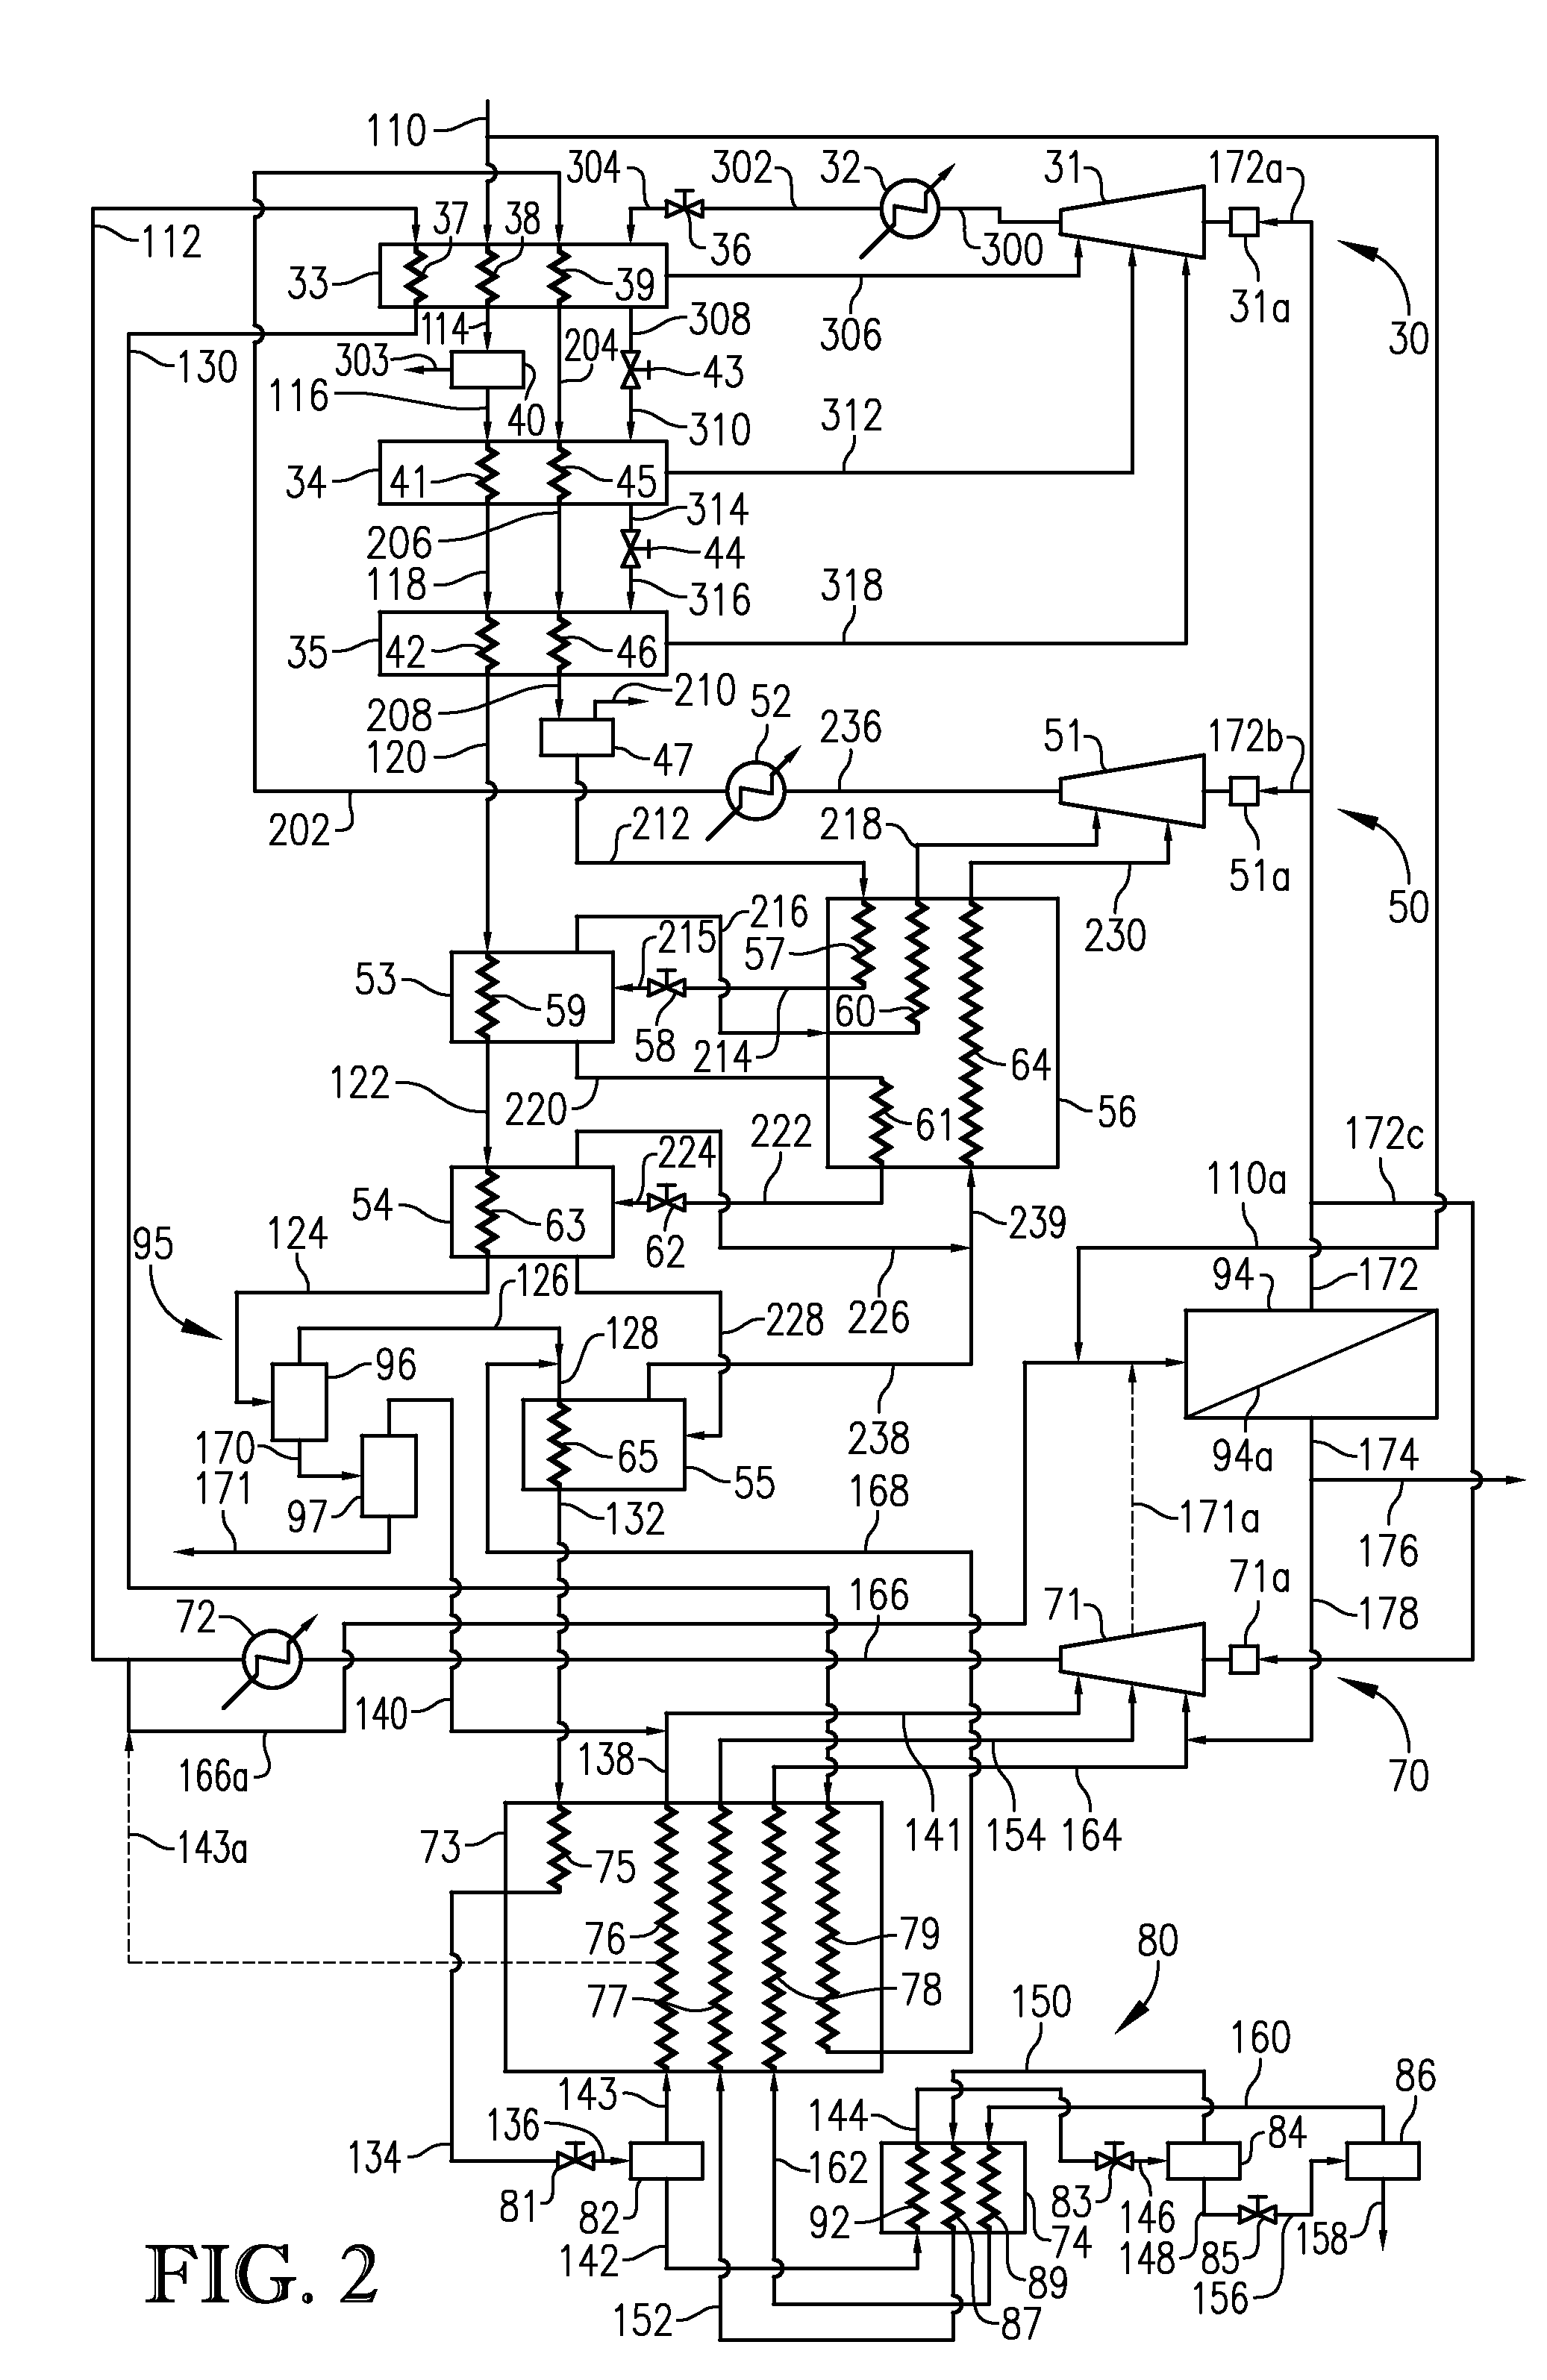 System for enhanced fuel gas composition control in an LNG facility